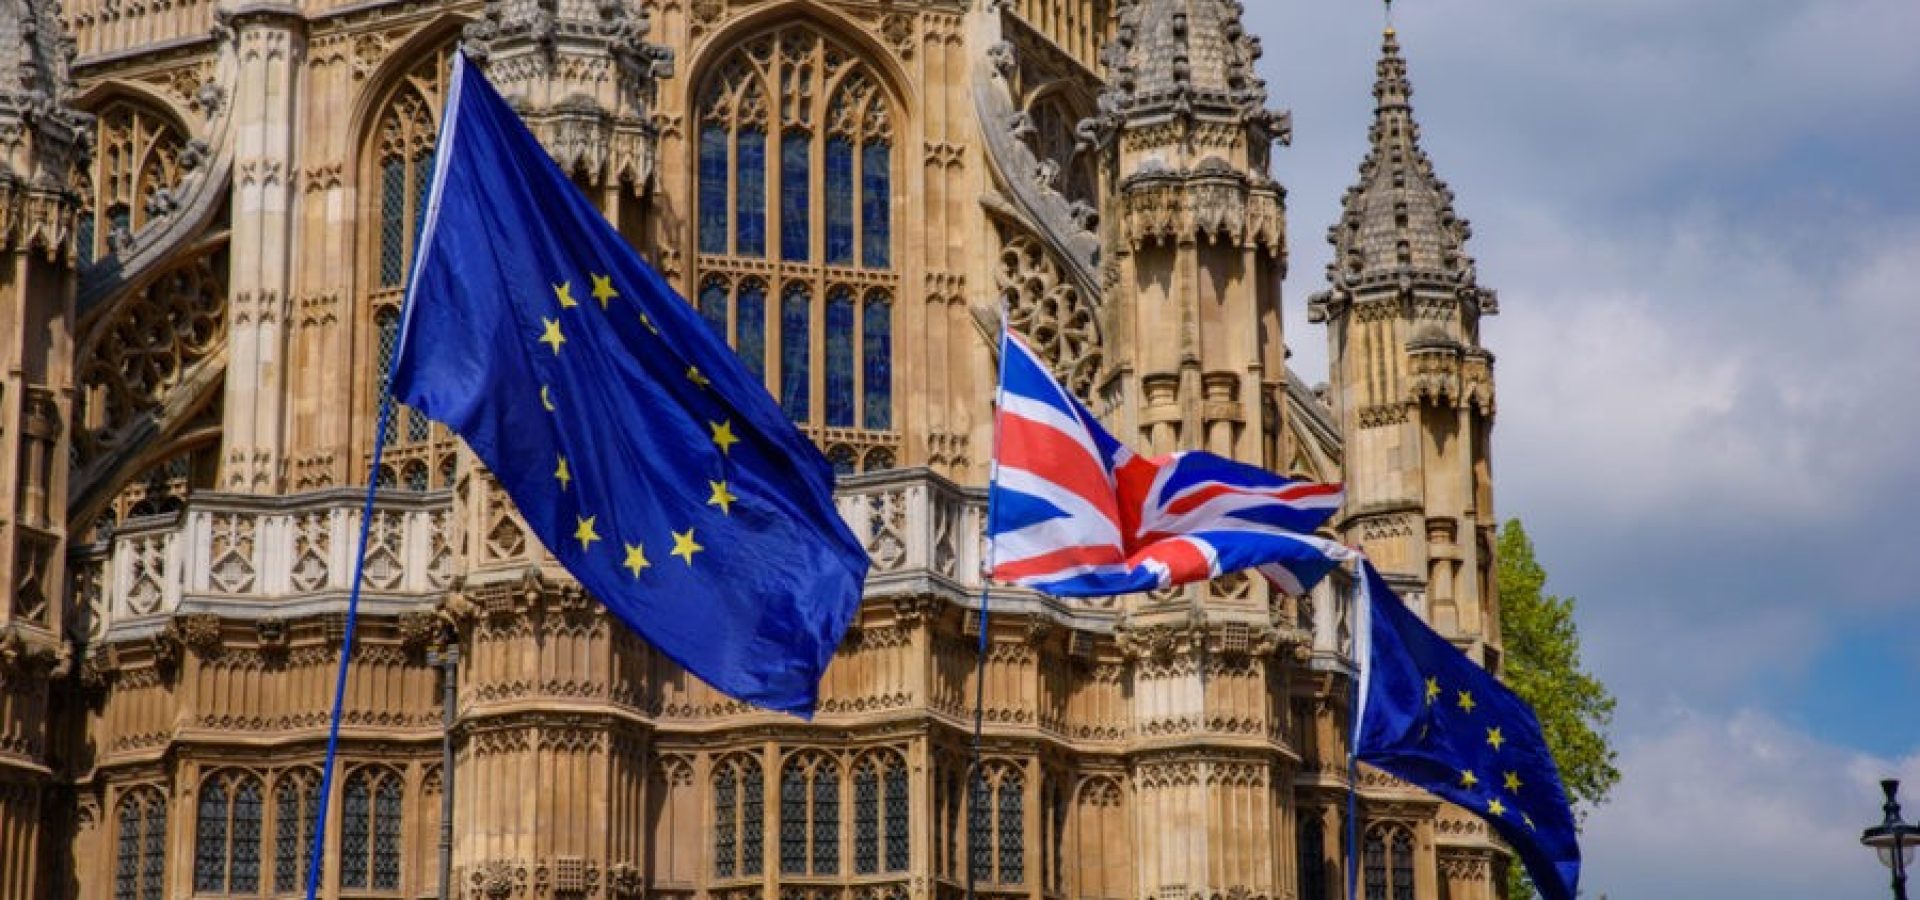 Wibest – UK Currency: The UK and EU flags in front of the UK parliament.